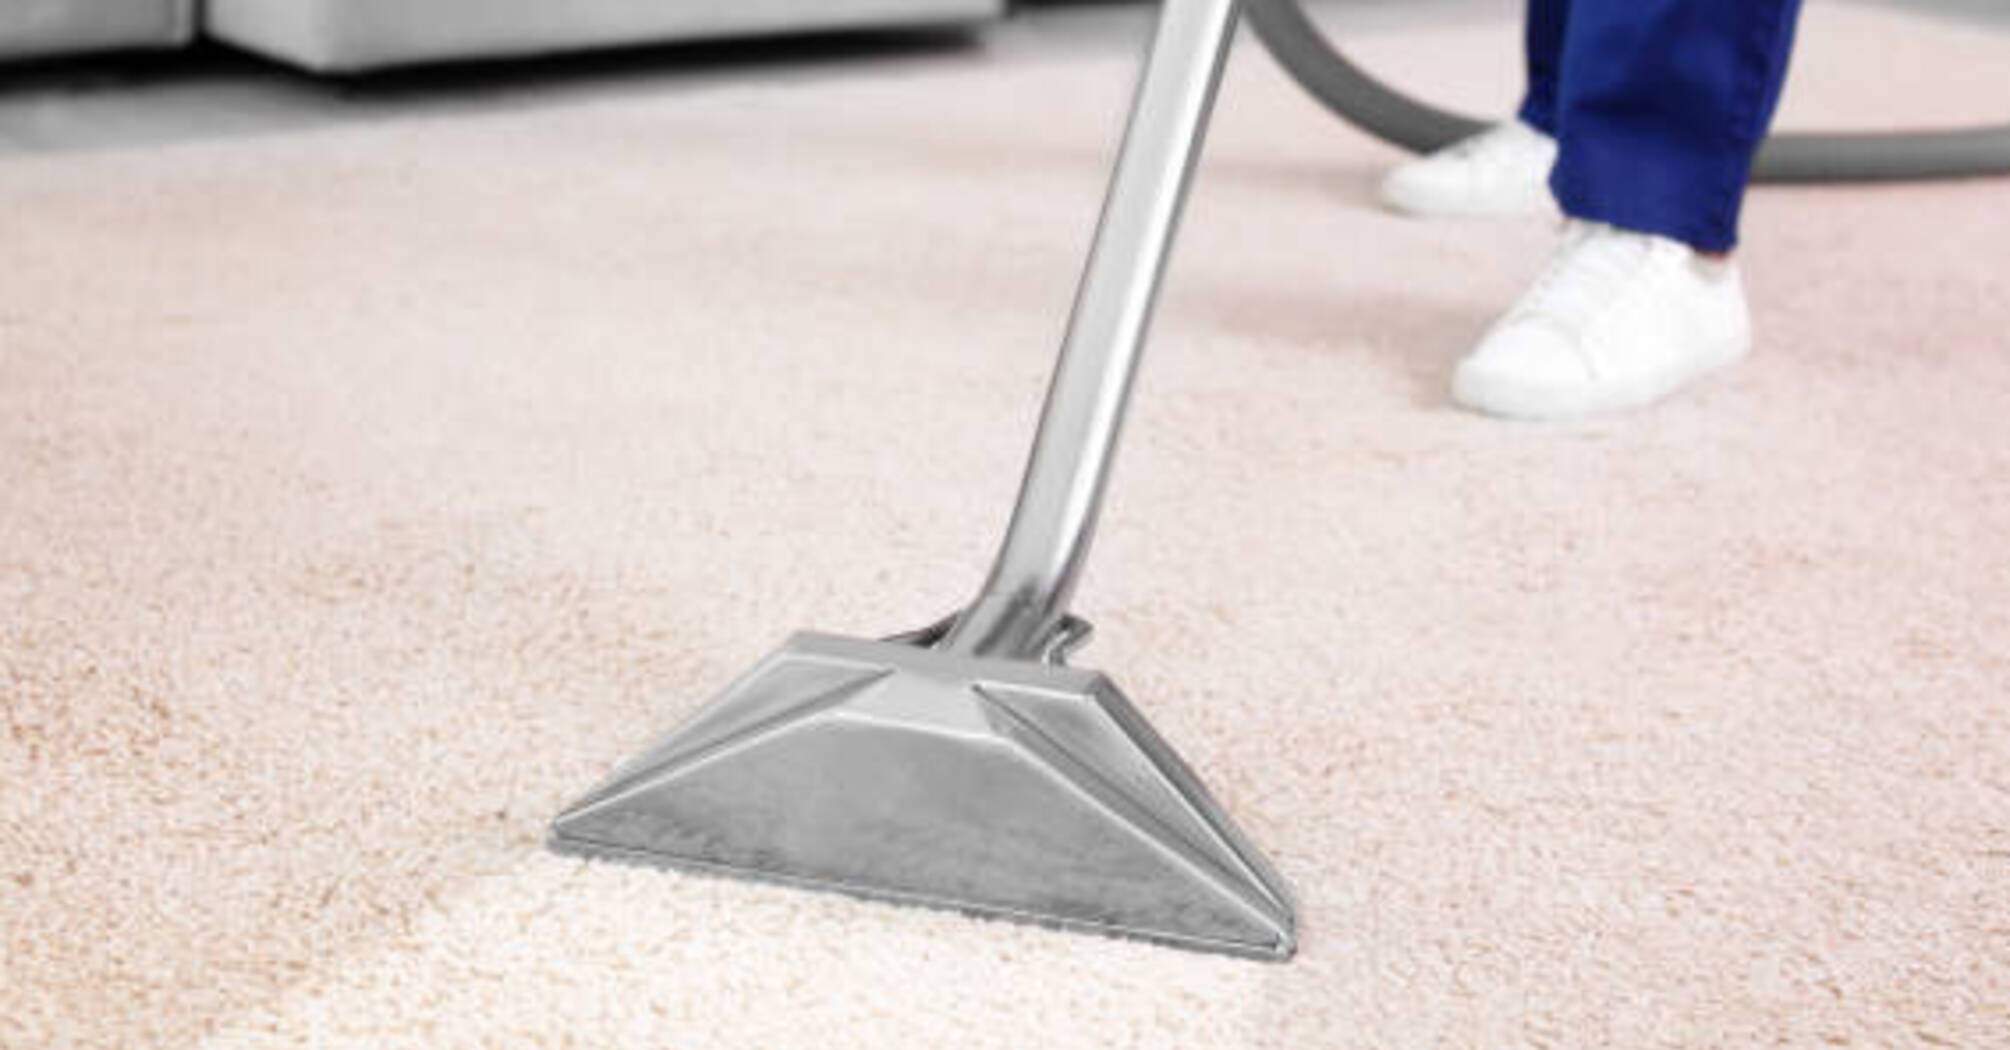 How to clean the carpet from wool: 3 useful life hacks